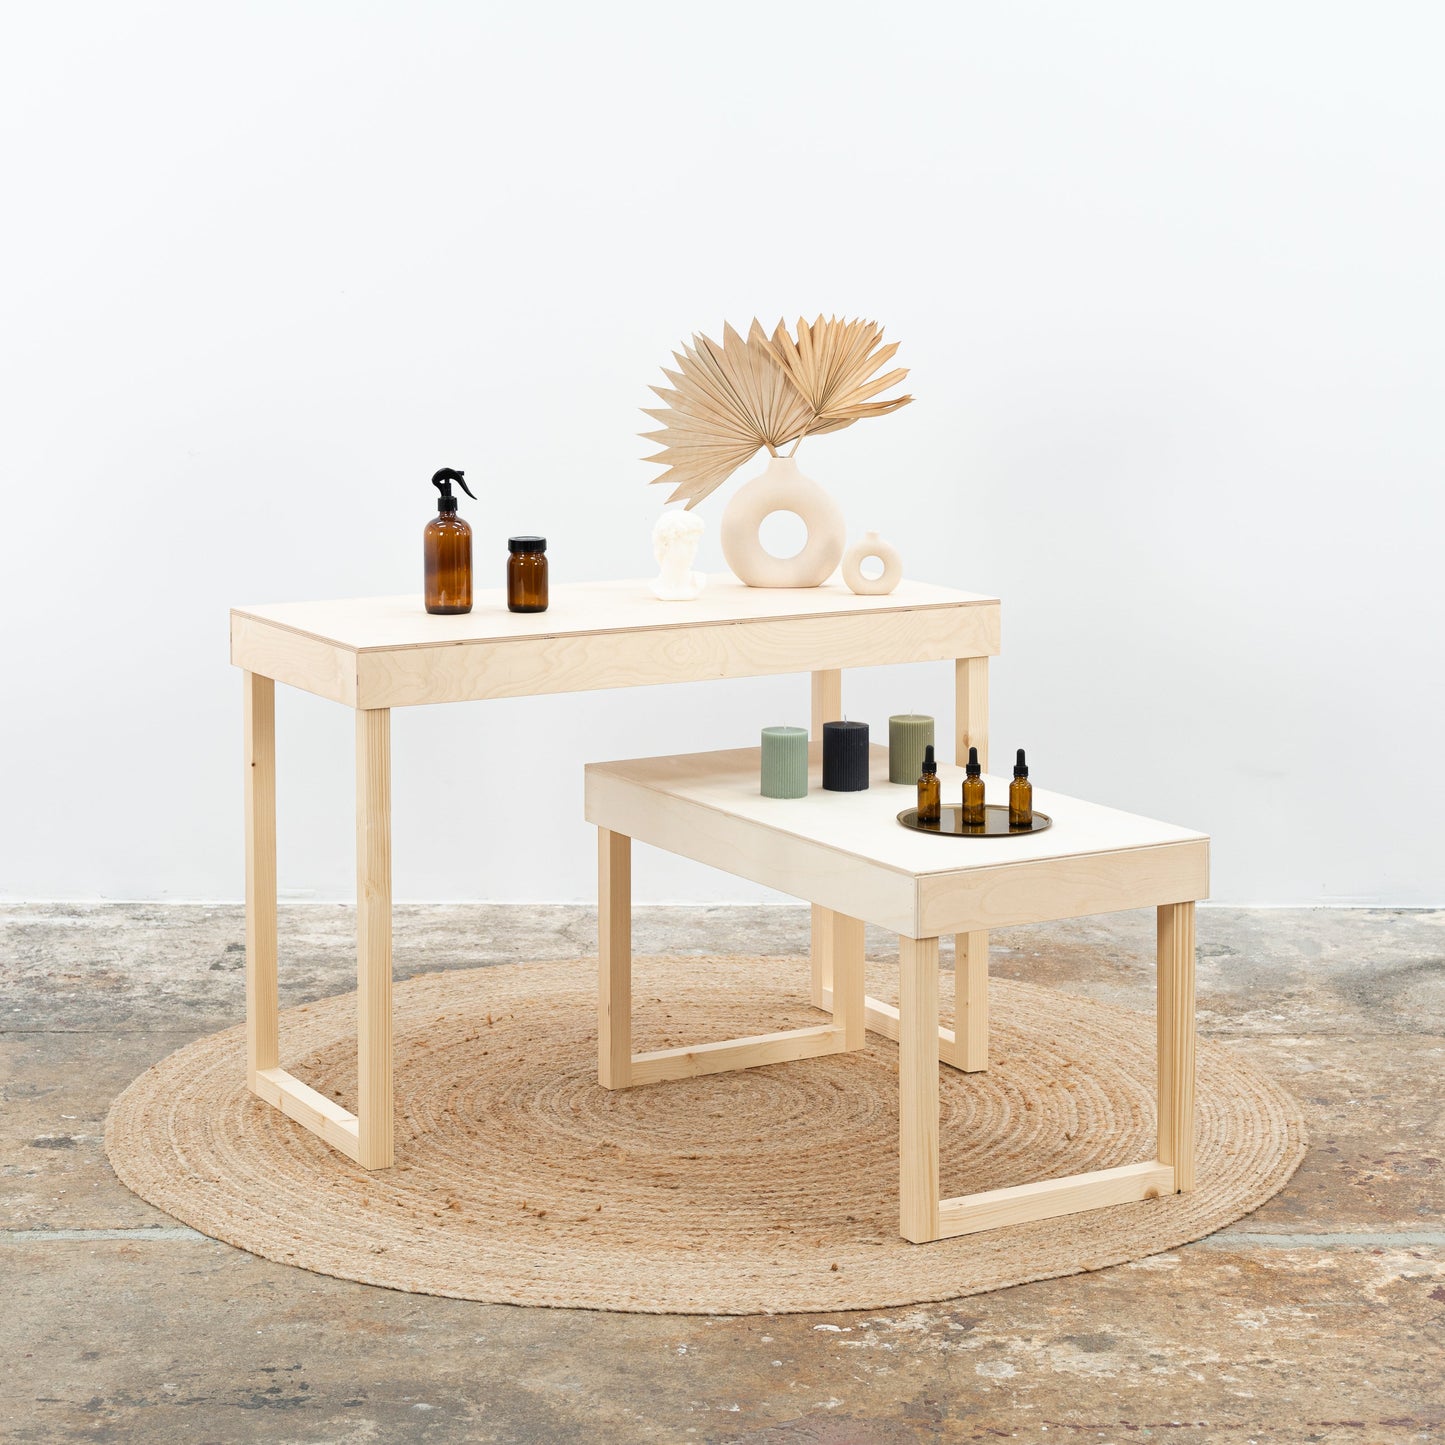 SAMPLE SALE | A set of two display nesting tables VC-05-NT, perfect as a craft show display, store tiered display table